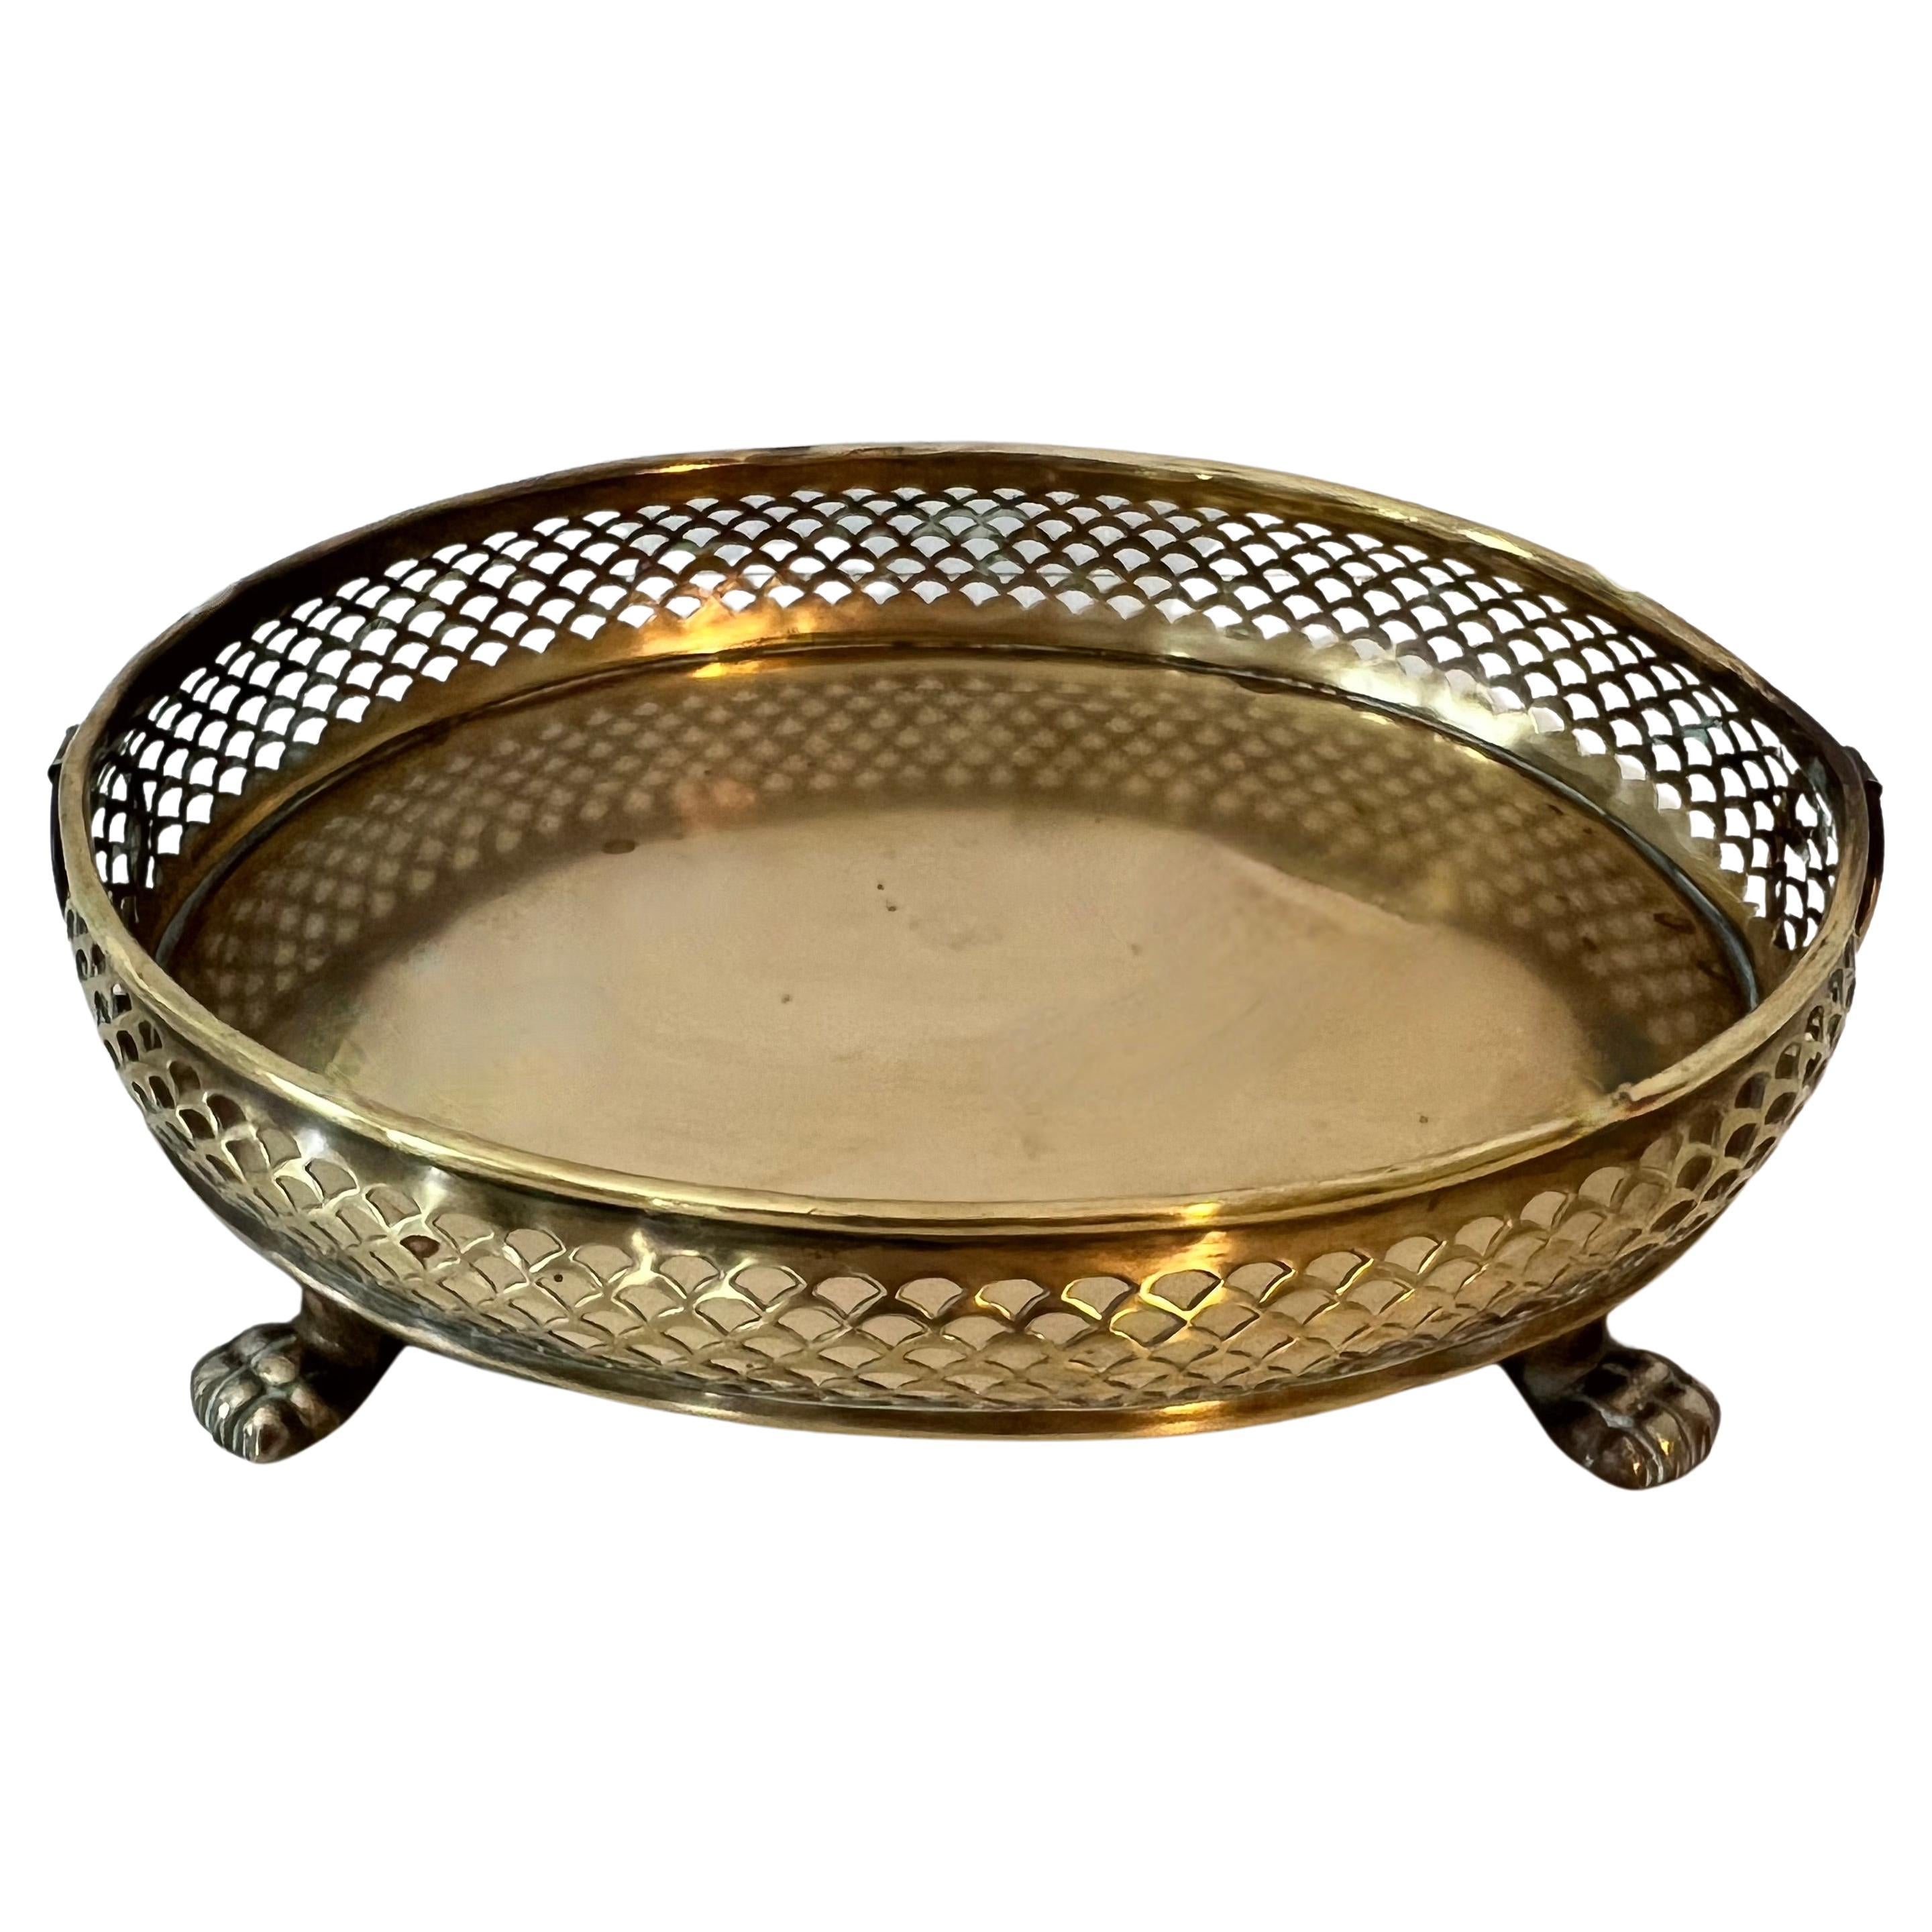 Oval Brass Tray with Intricate Gallery and Paw Feet